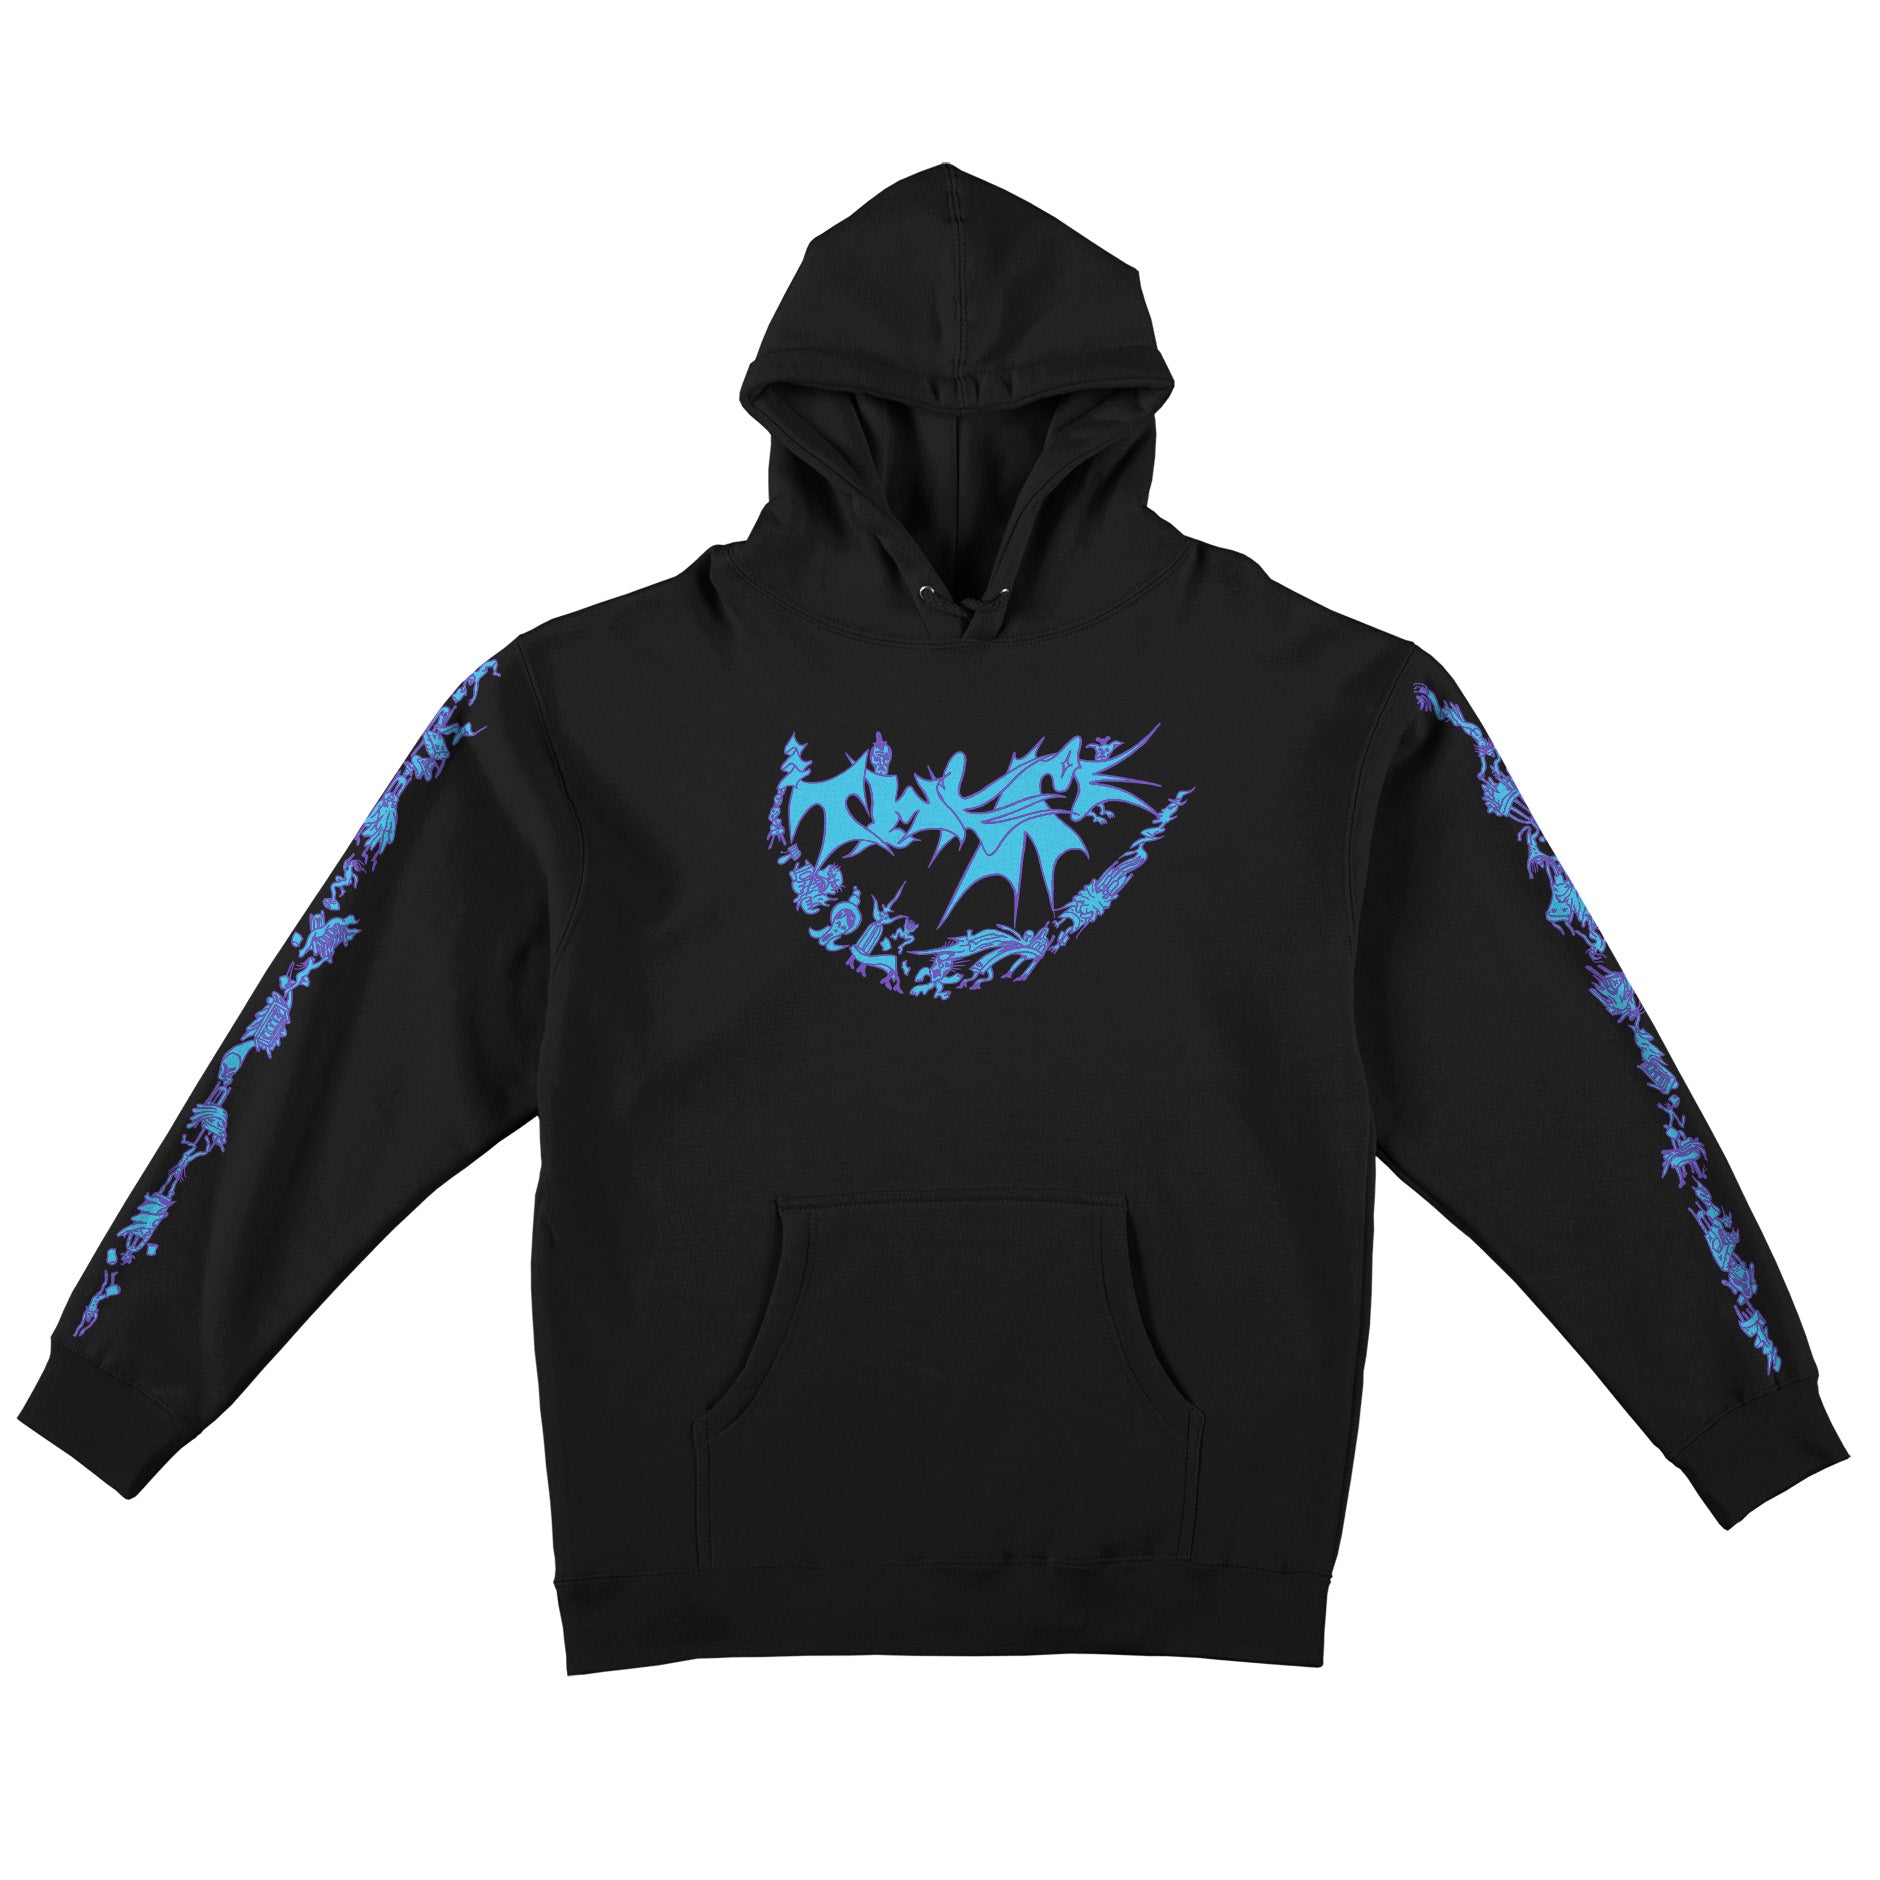 There Midnight Oil Hoodie Black